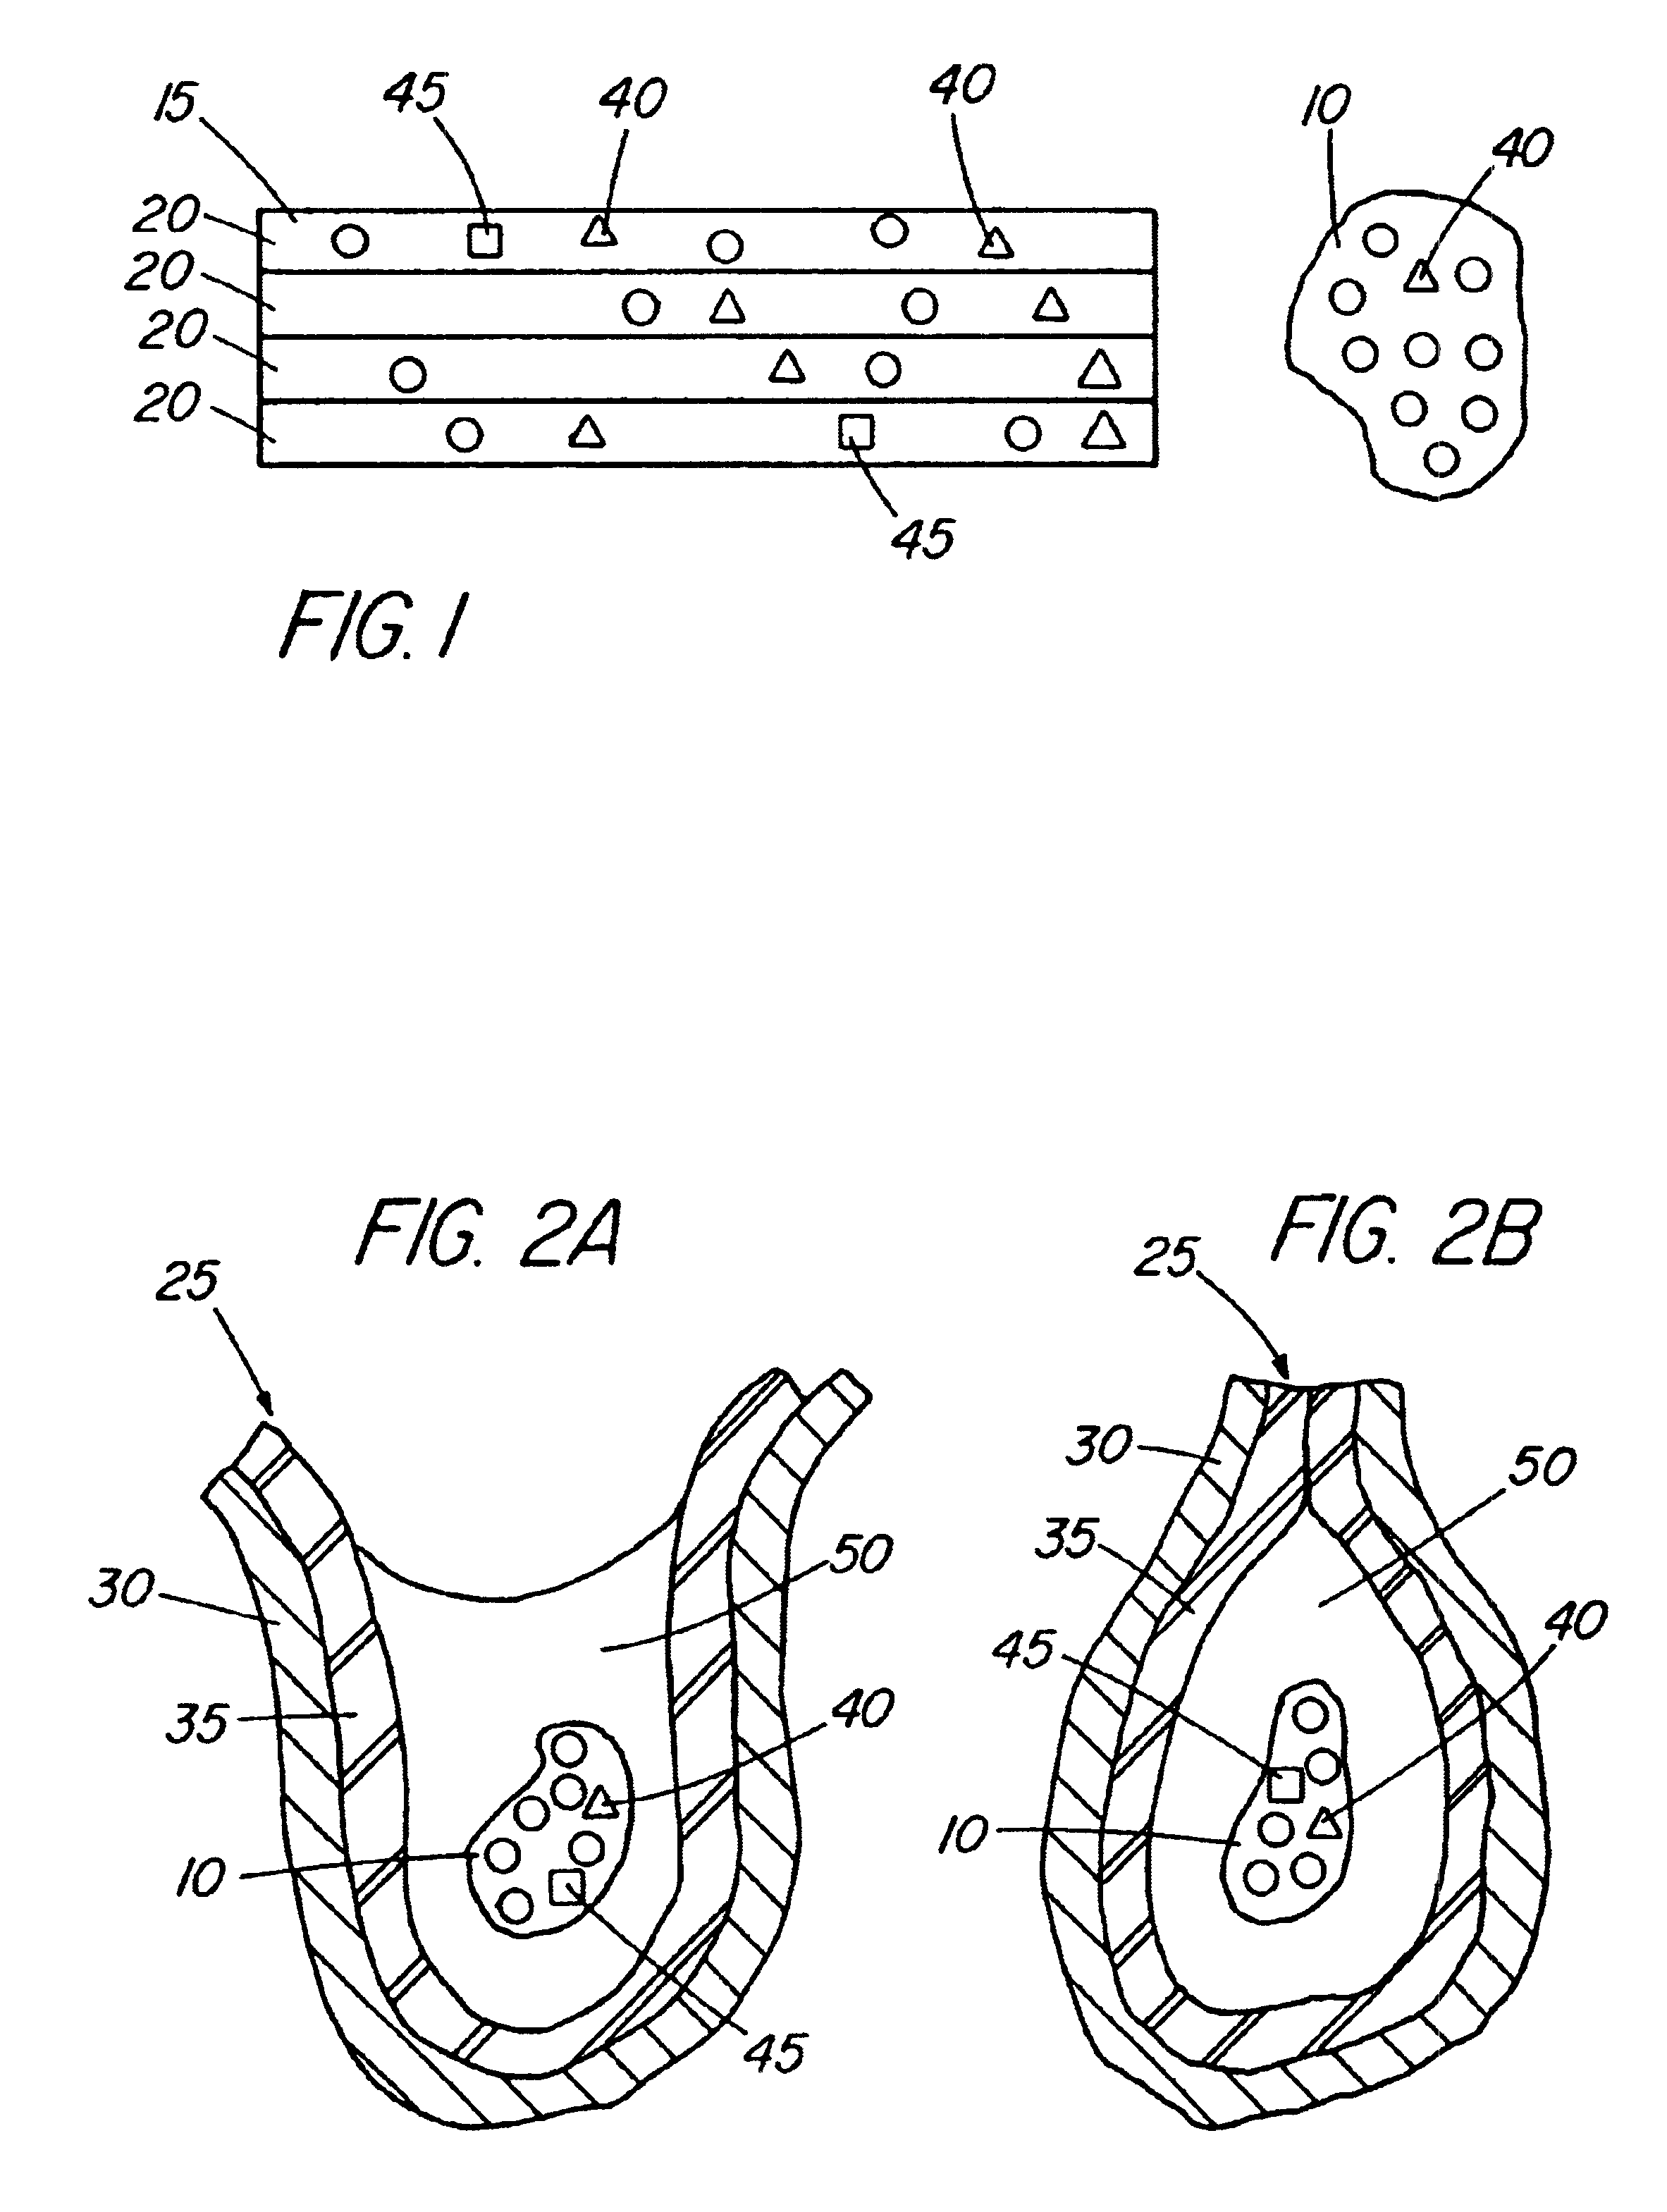 Multi-formed collagenous biomaterial medical device